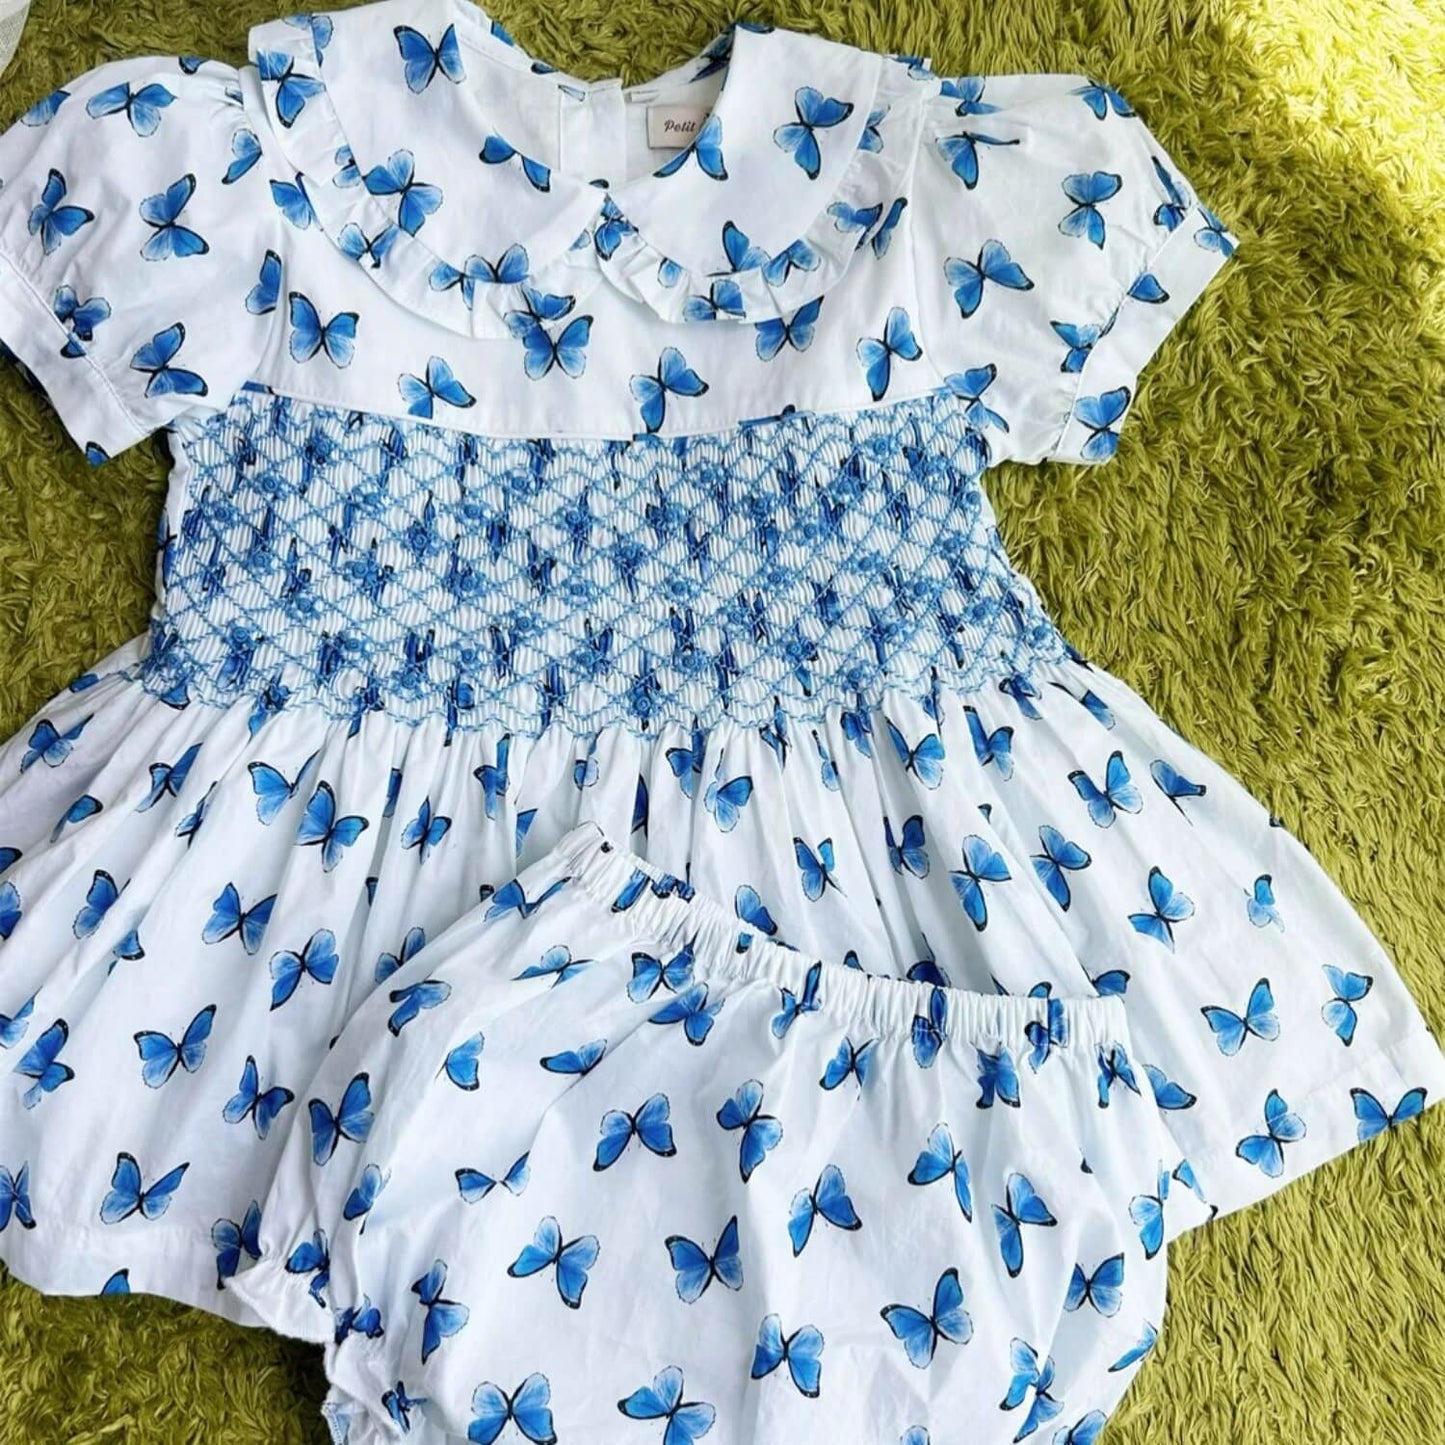 Butterfly Print Blue Hand Smocked Dress,2T to 7T.